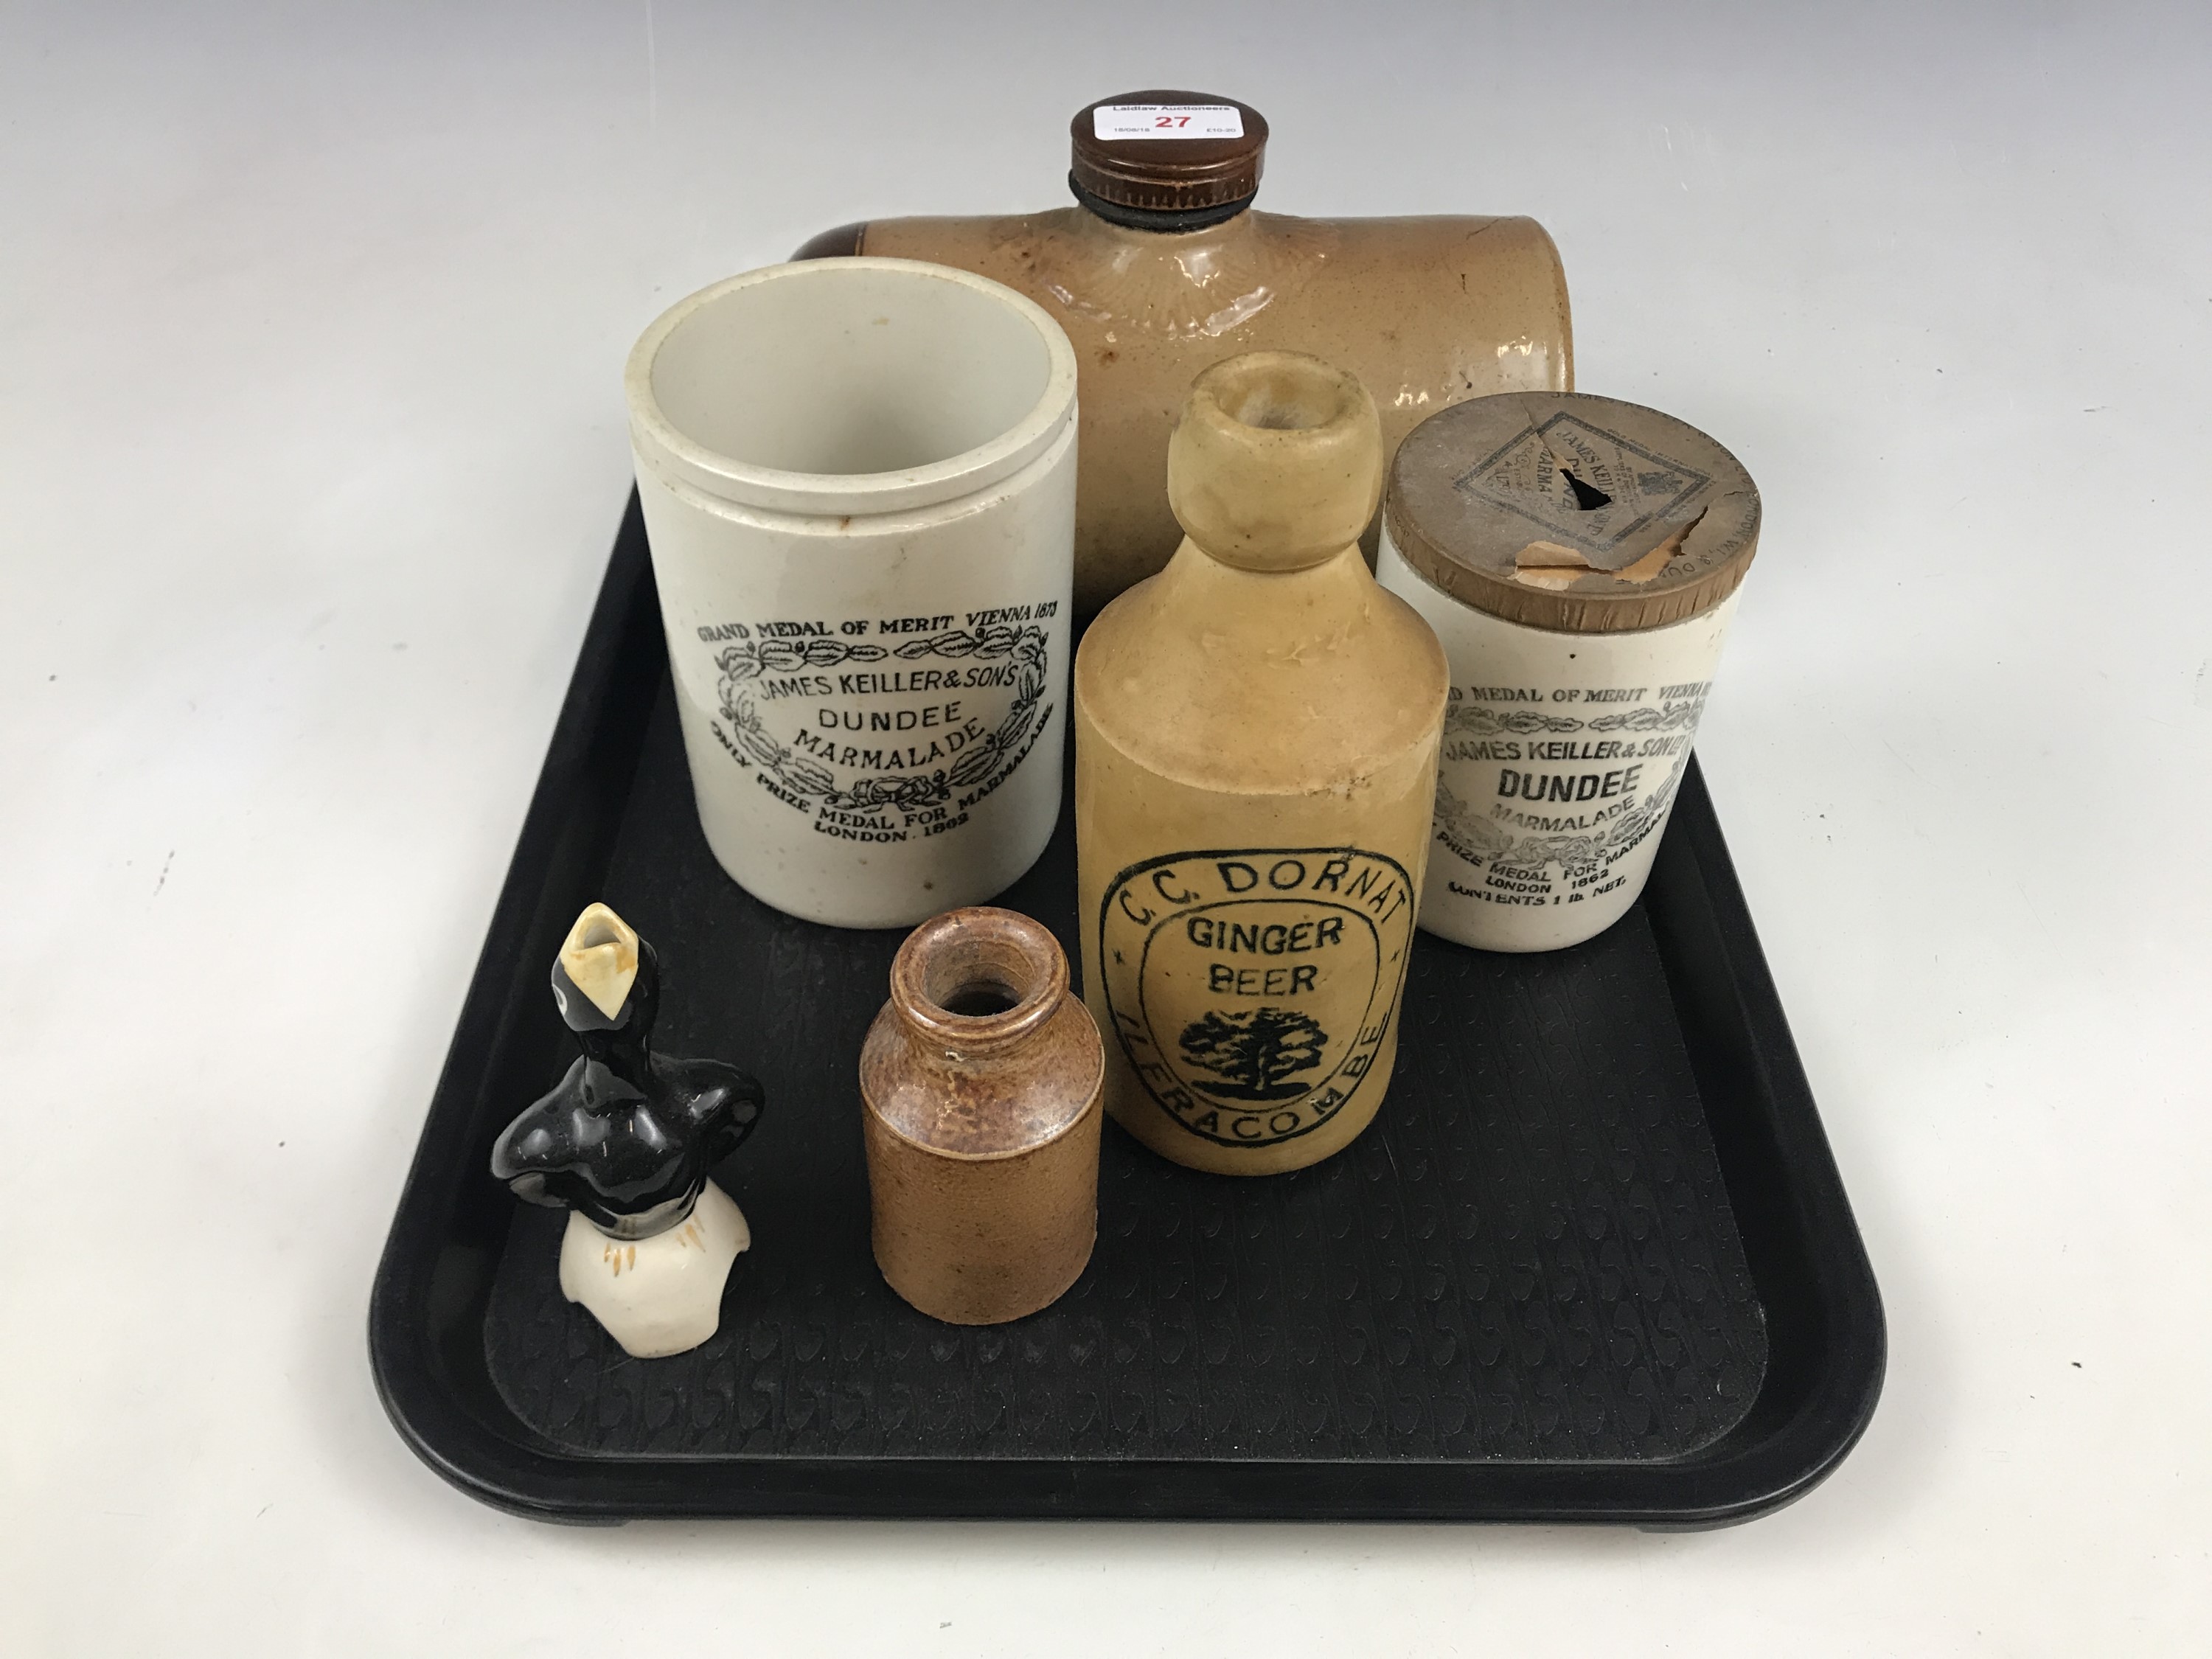 Vintage stoneware household / kitchen items, including James Keiller & Sons marmalade jars, a C.